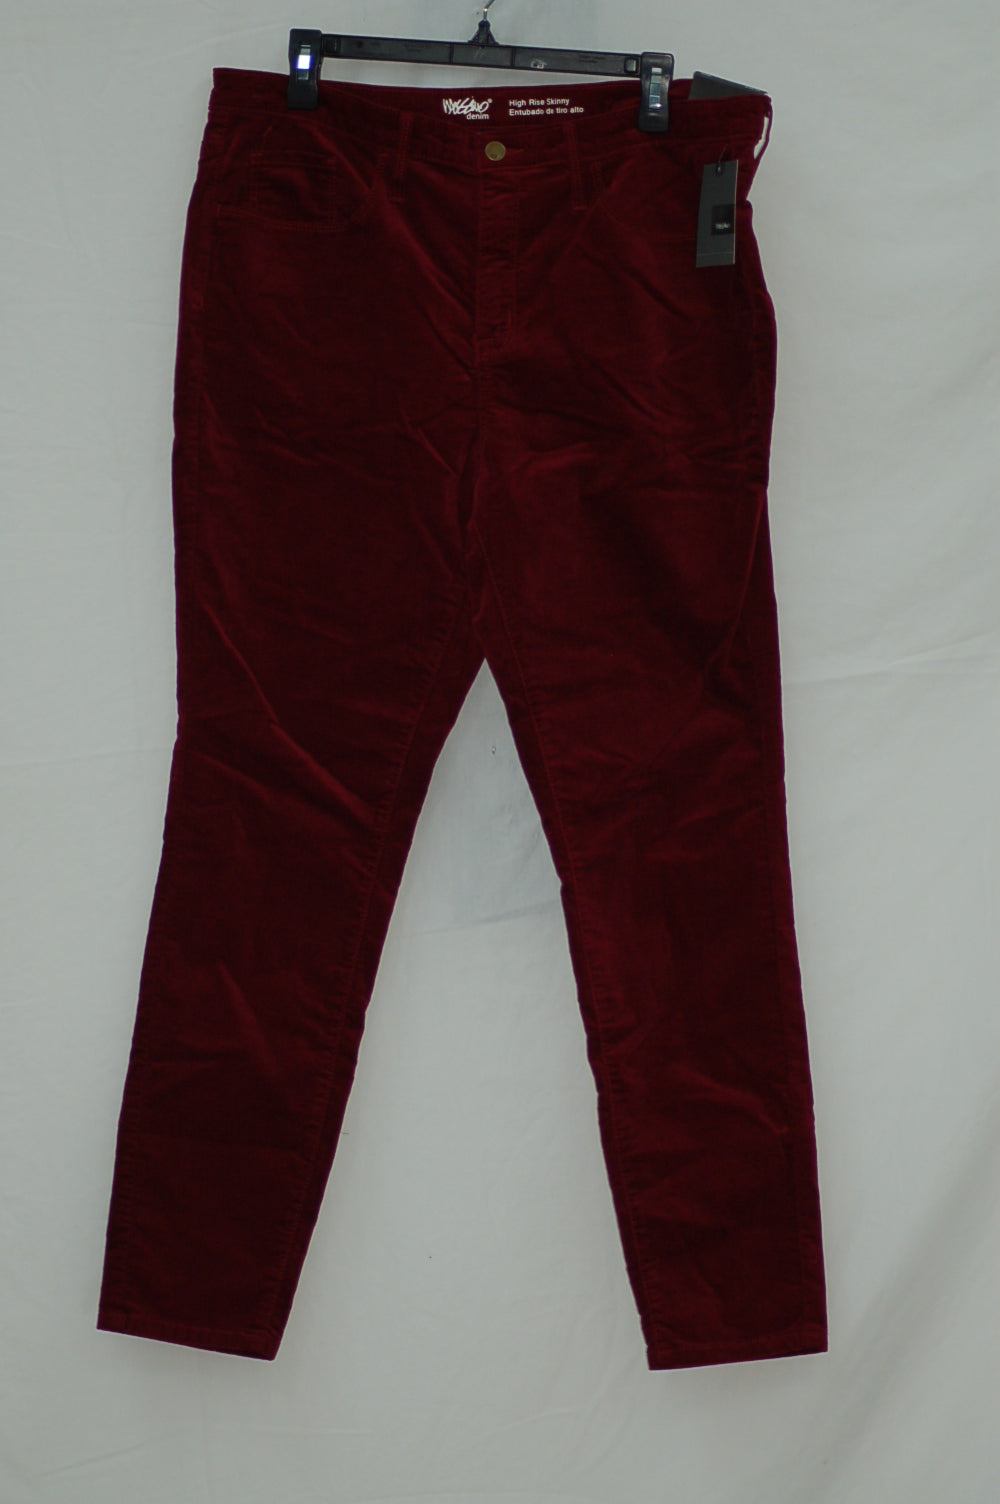 MOSSIMO WOMEN'S HIGH RISE SKINNY JEANS, RED, SIZE 16/33/R